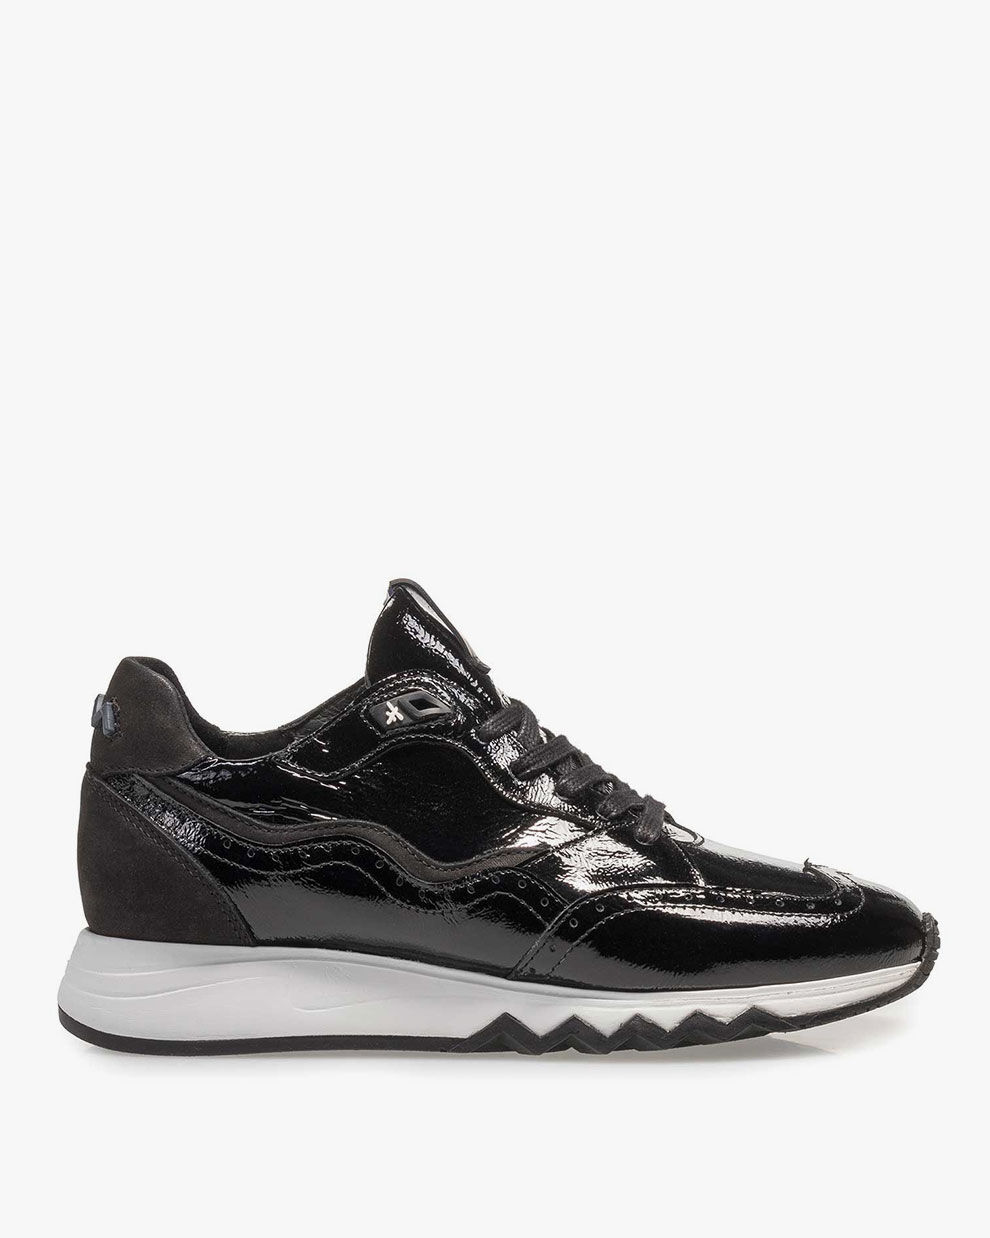 nike black patent leather sneakers